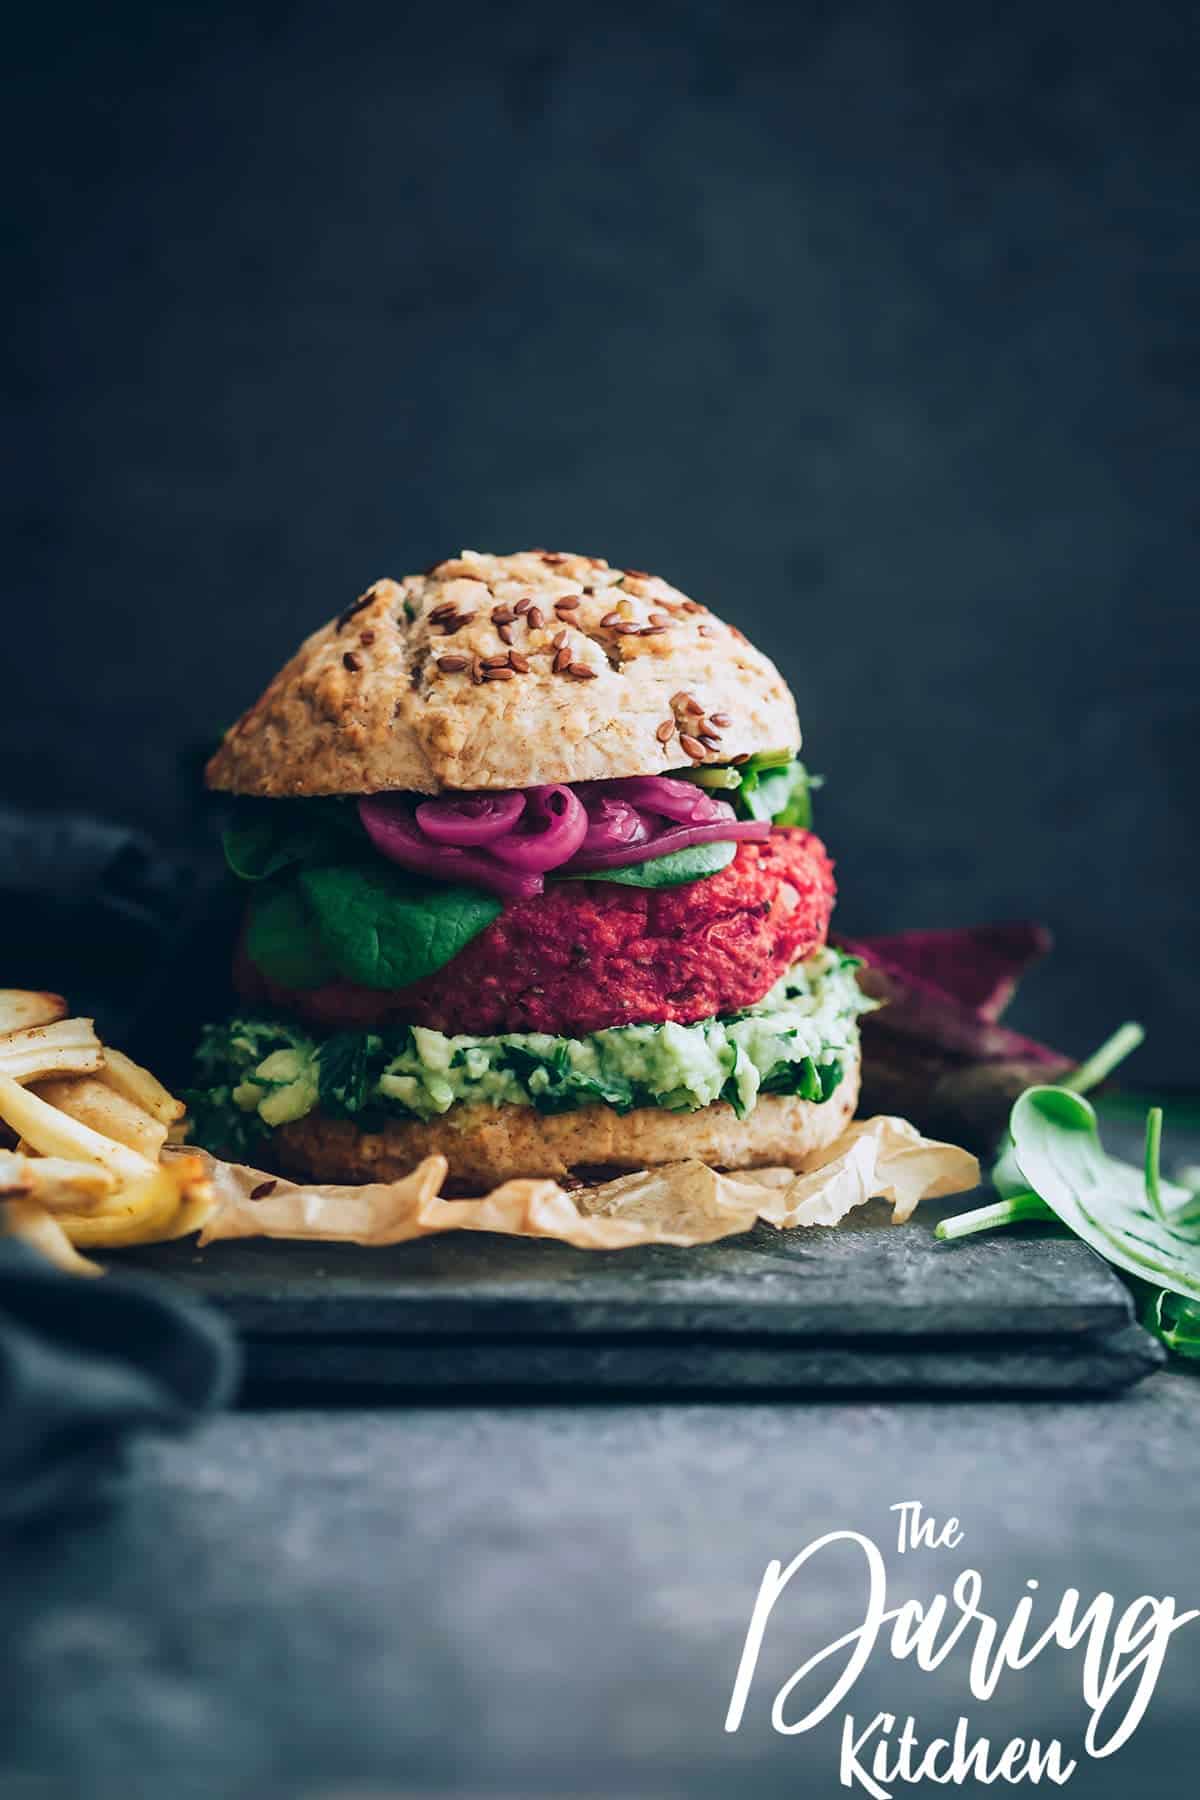 Beet Burgers with Herbed Guacamole and Parsnip Fries - Daring Kitchen